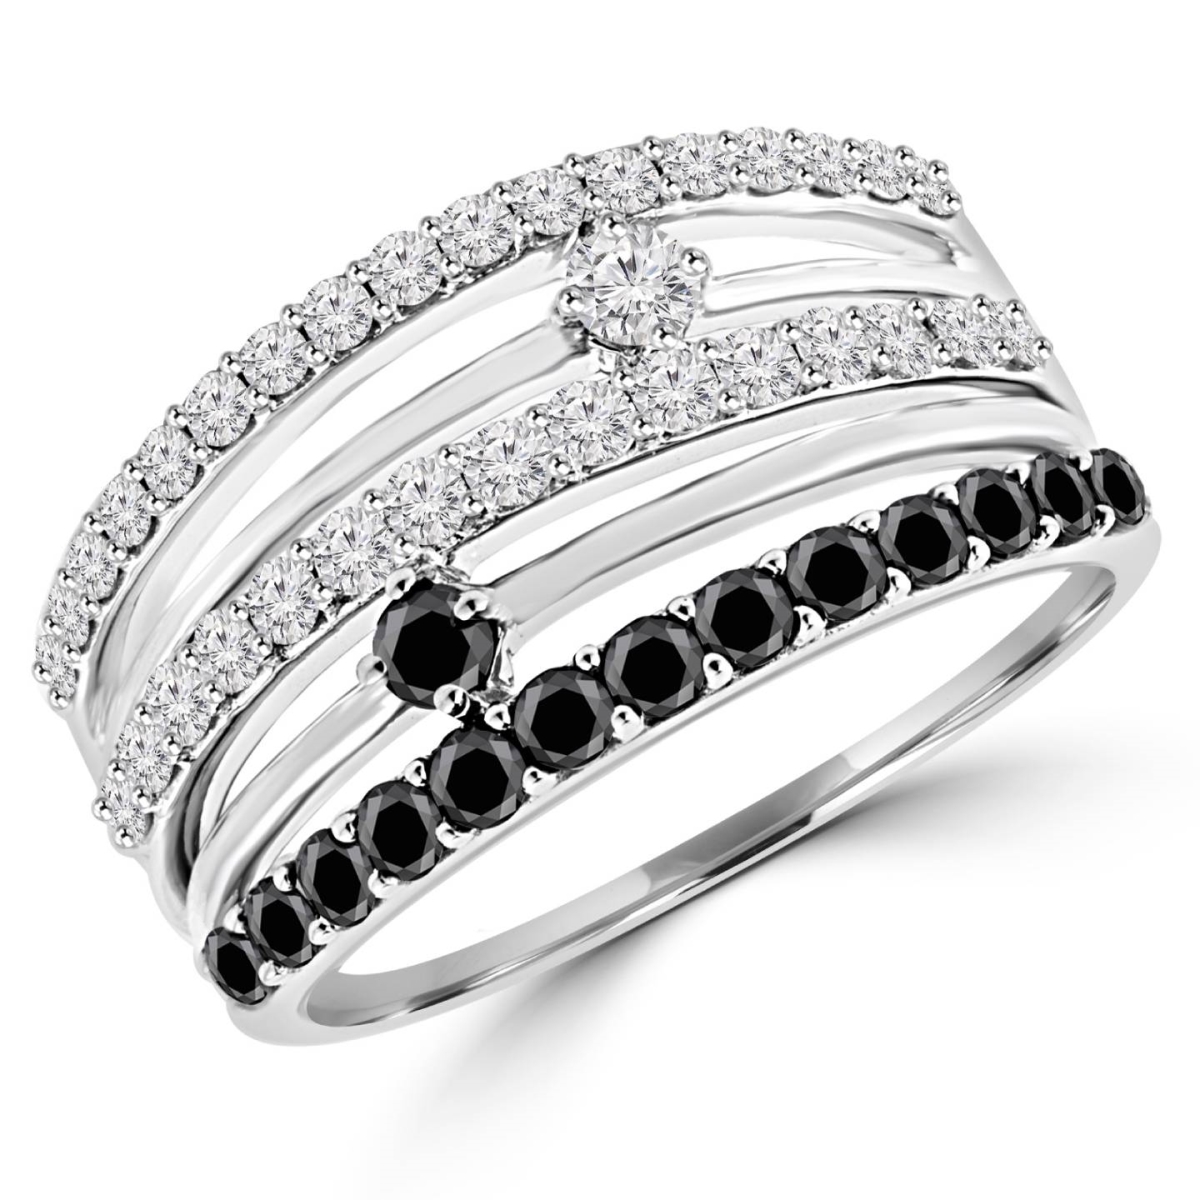 Picture of Majesty Diamonds MDR140107-3 0.8 CTW 5-Row Black & White Diamond Fashion Cocktail Ring in 14K White Gold - Size 3